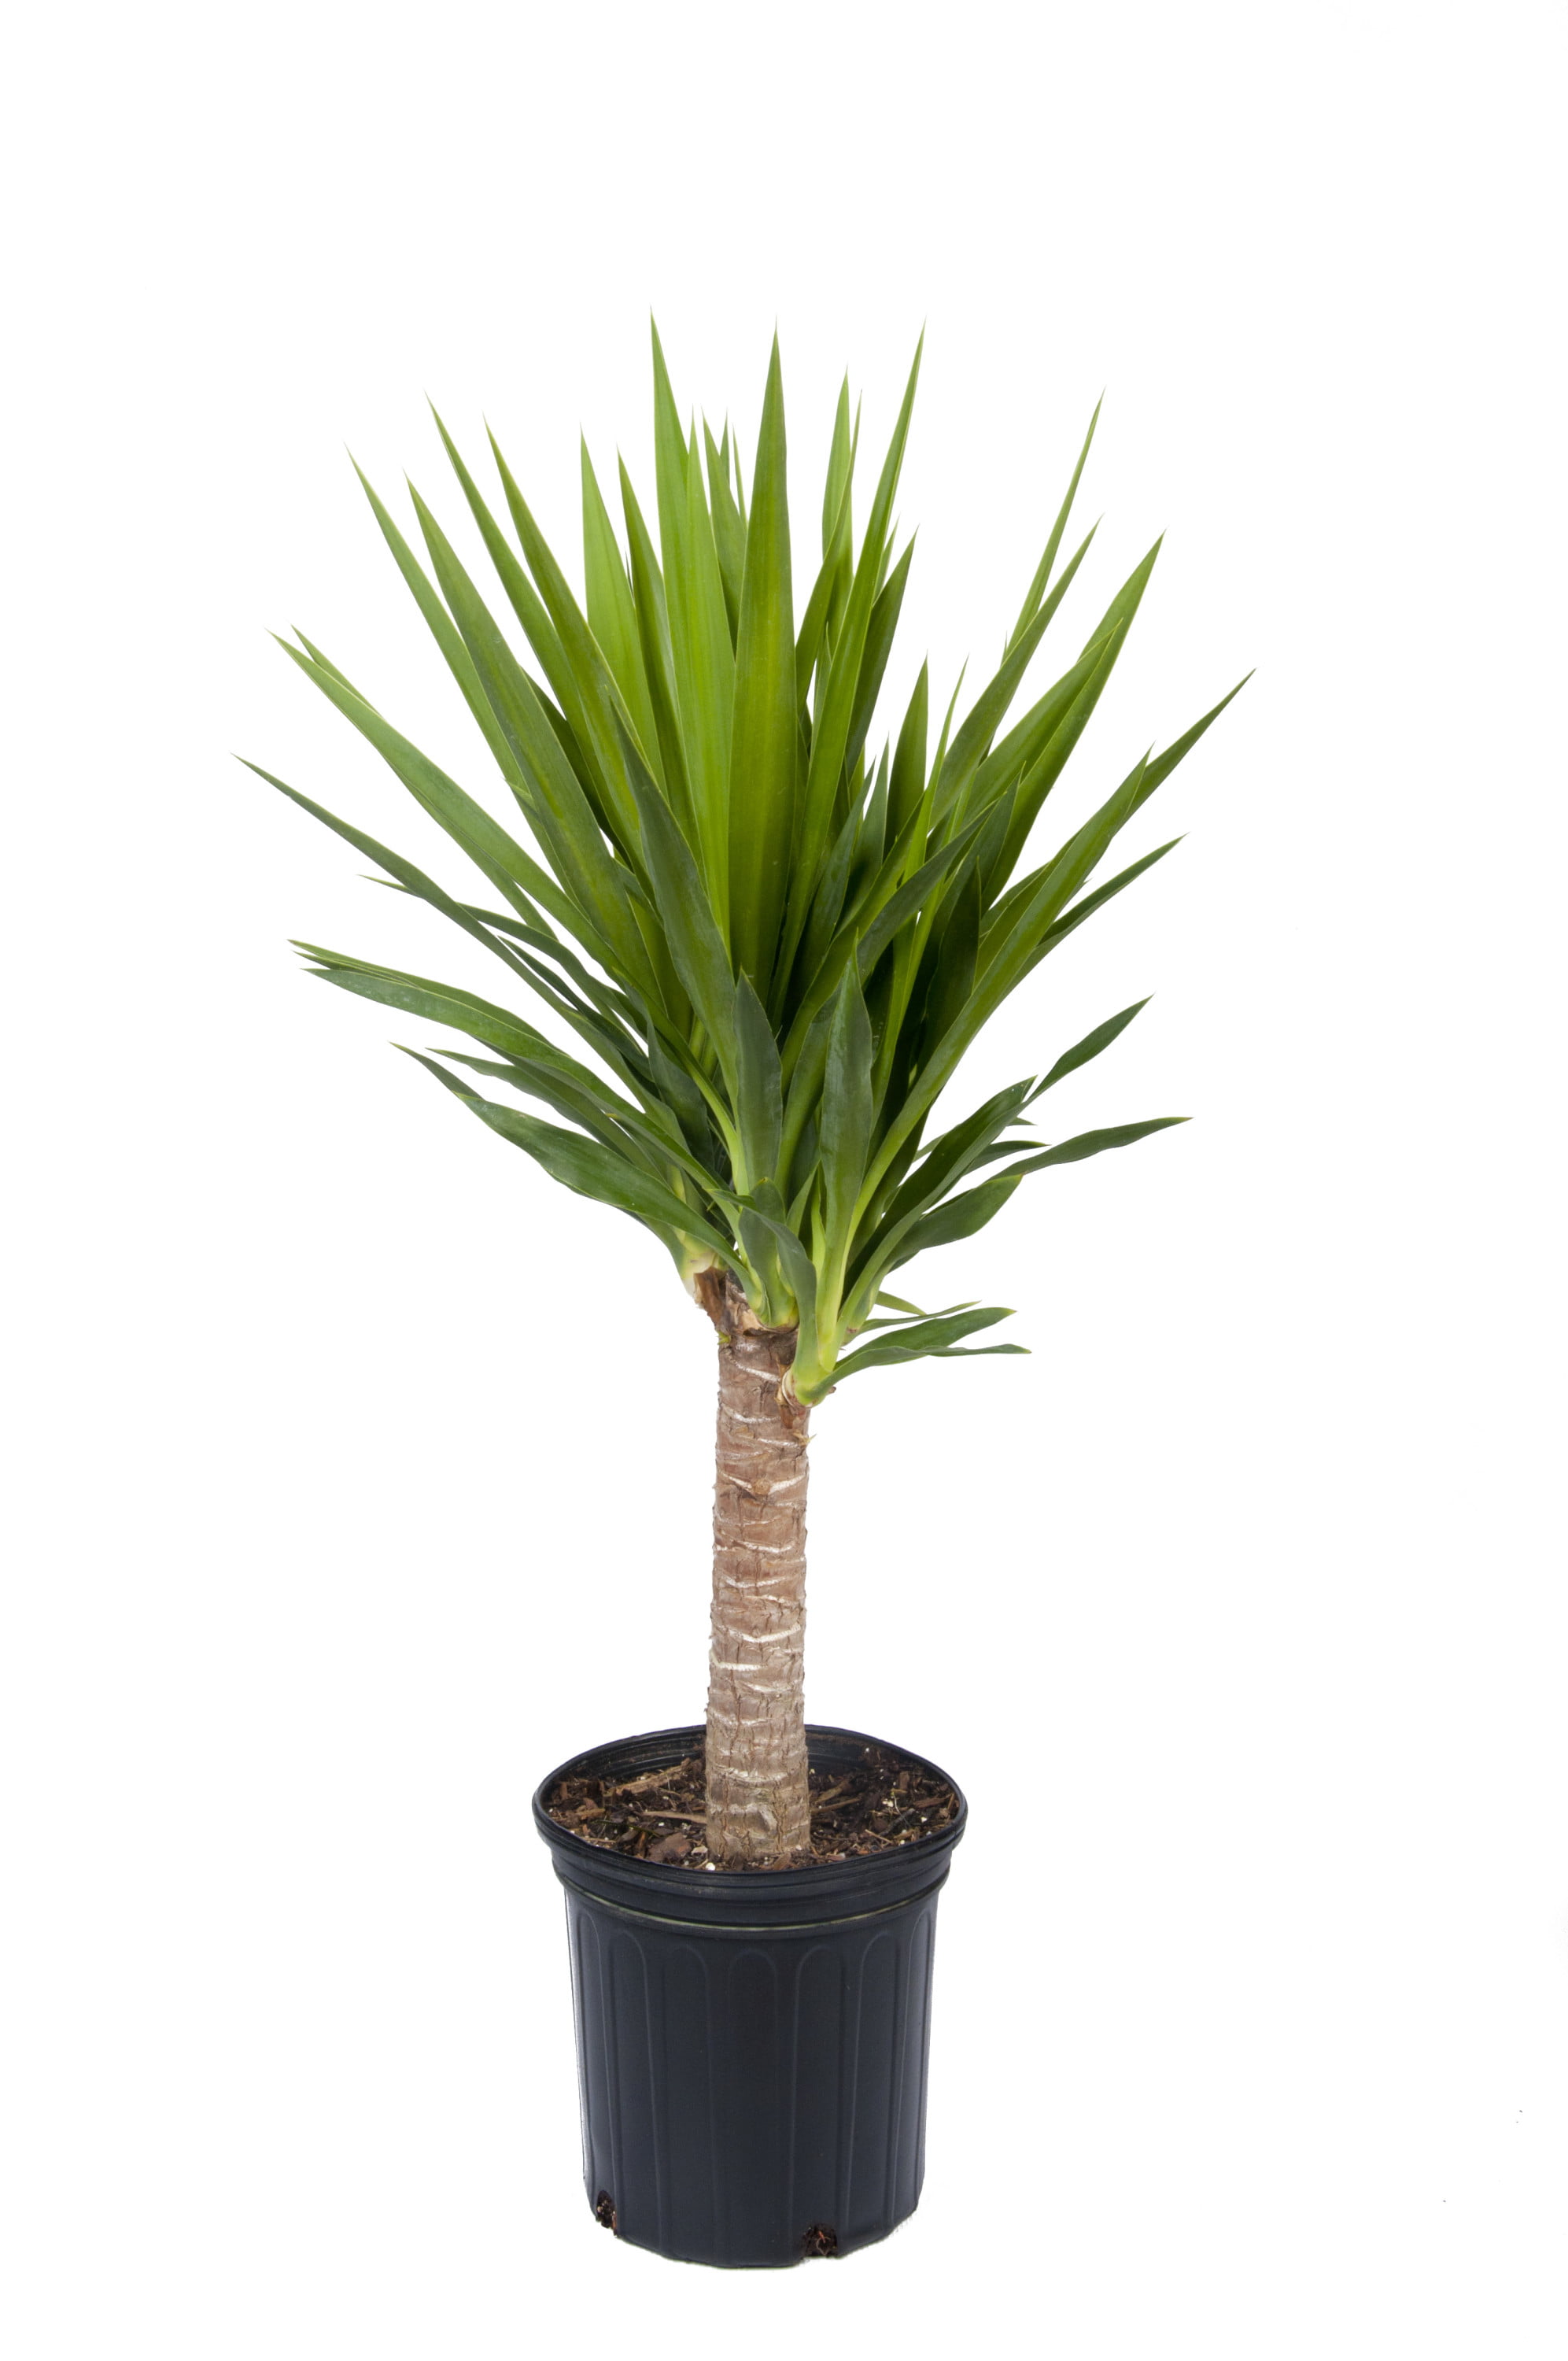 Costa Farms Live Indoor 20in. Tall Green Yucca Cane; Medium, Indirect Light  Plant in 20in. Grower Pot